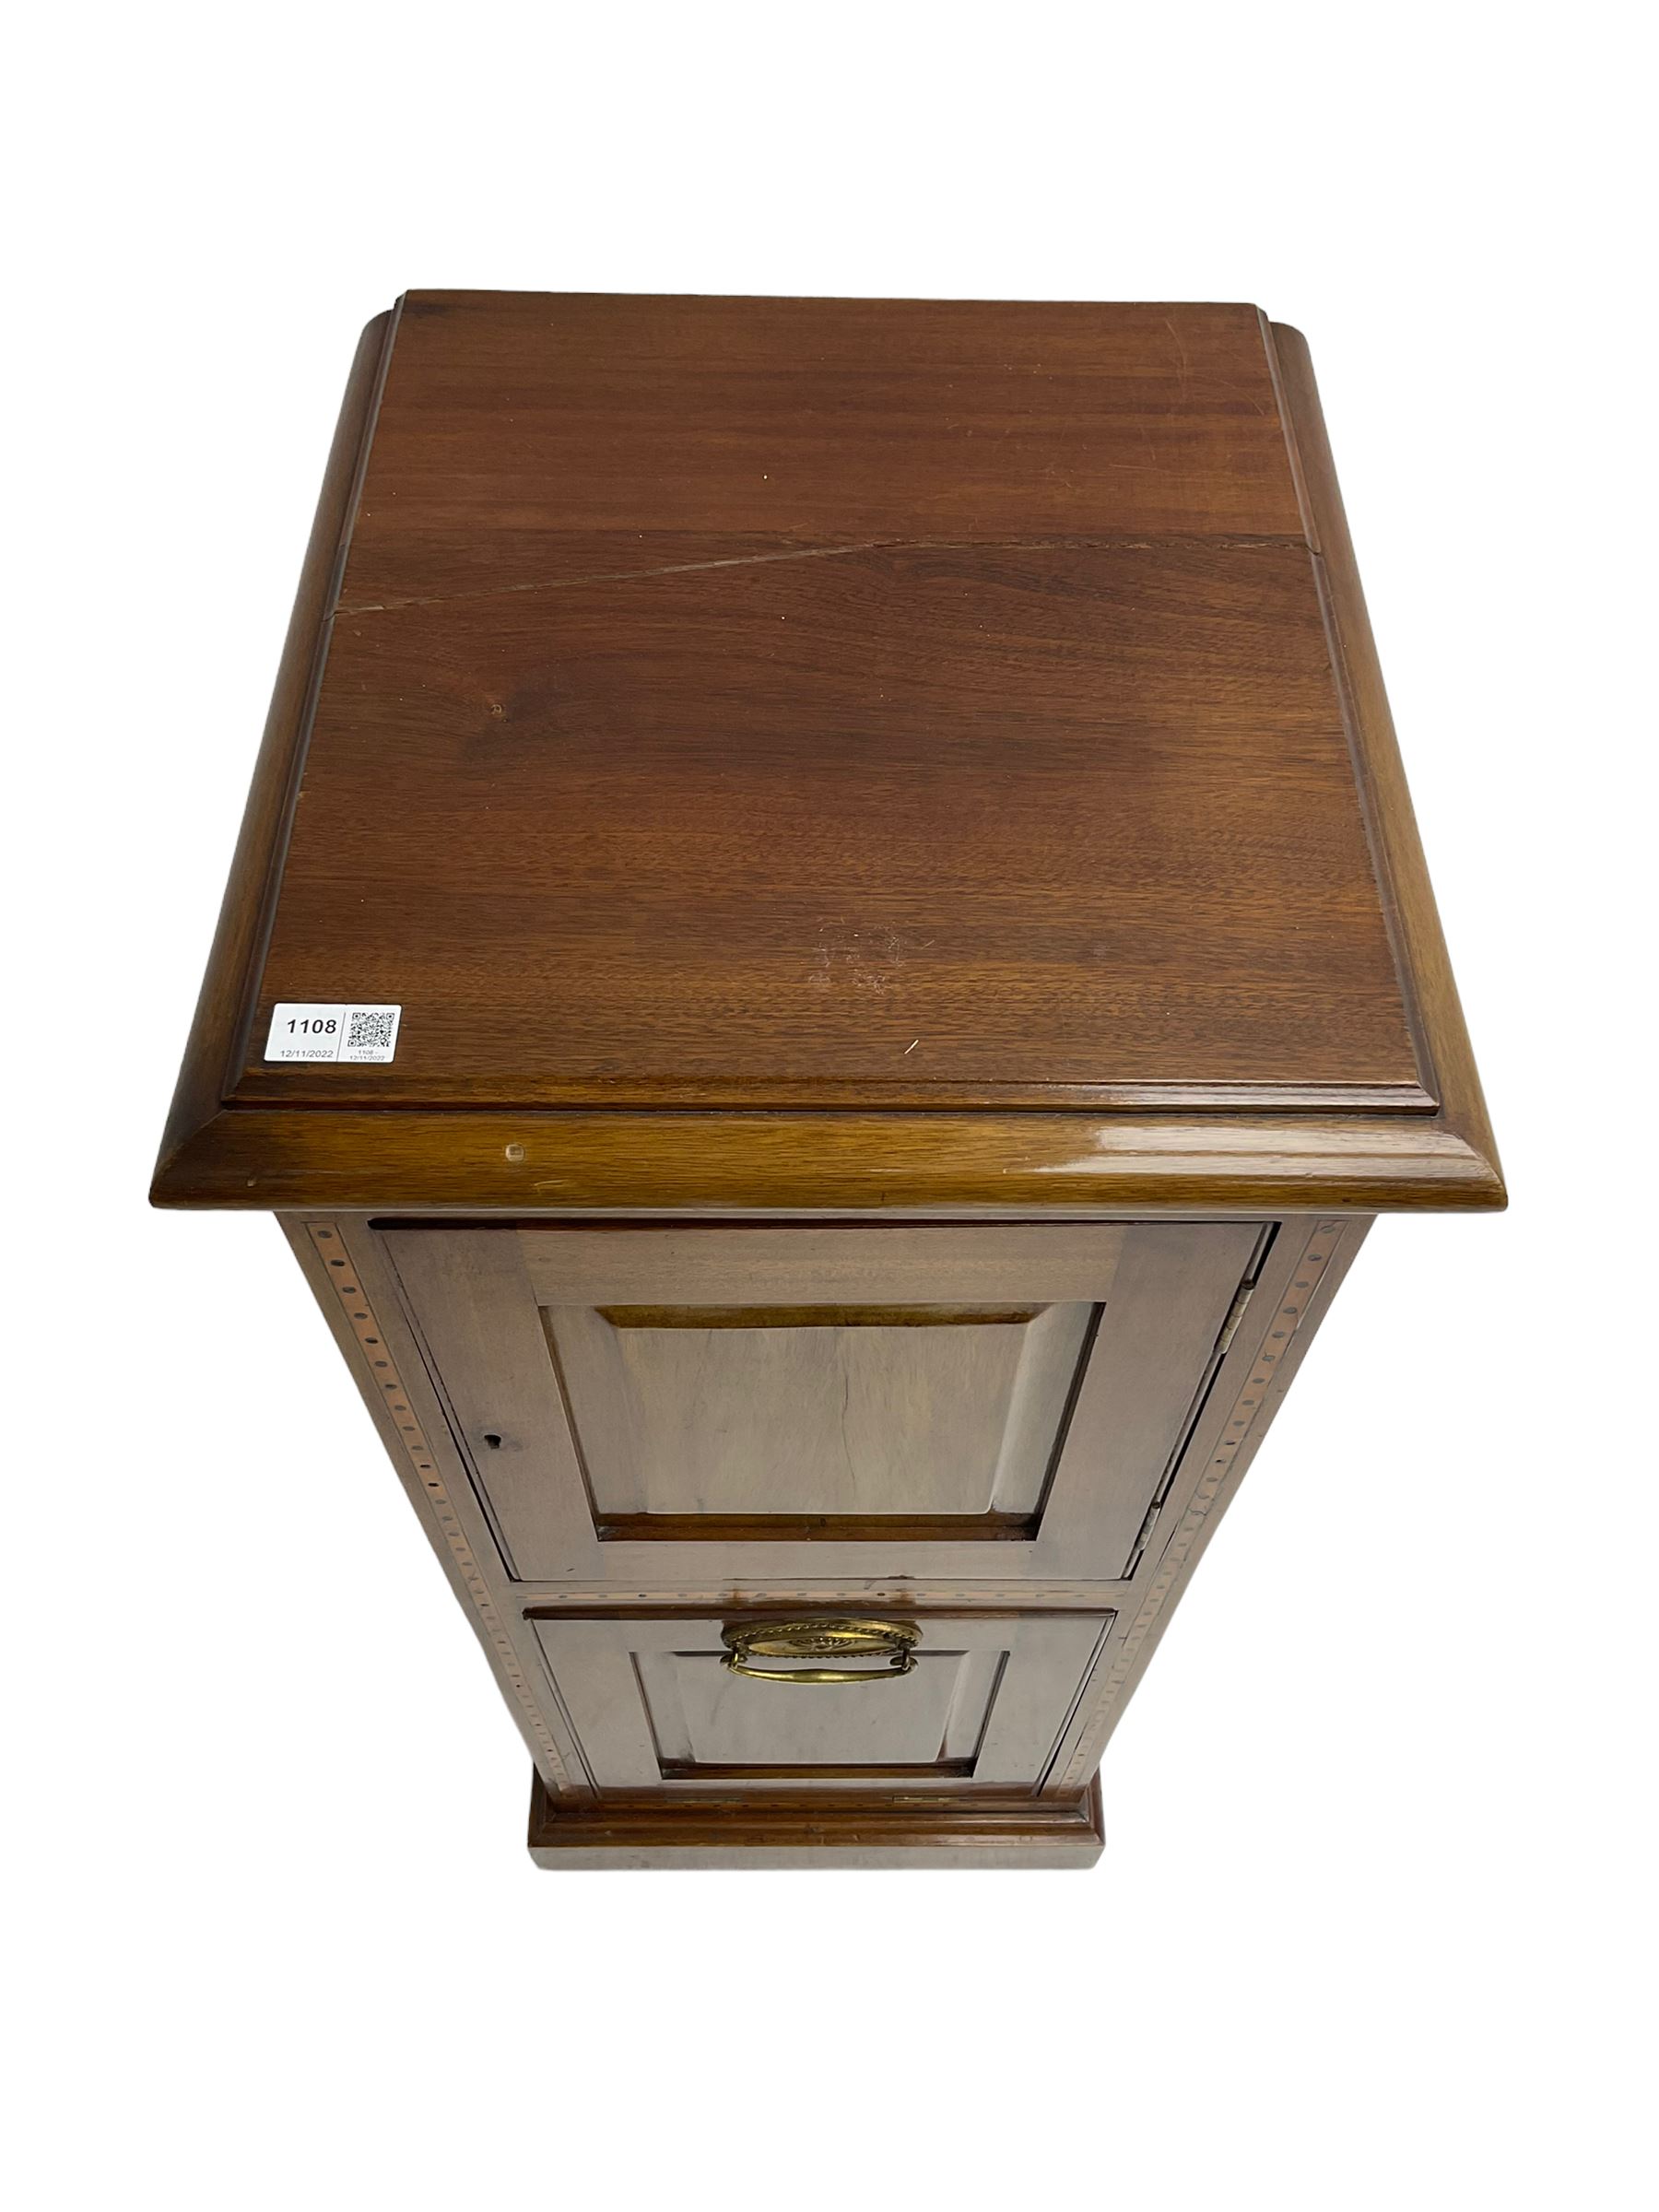 Early to mid-20th century inlaid mahogany coal compendium cabinet - Image 4 of 7